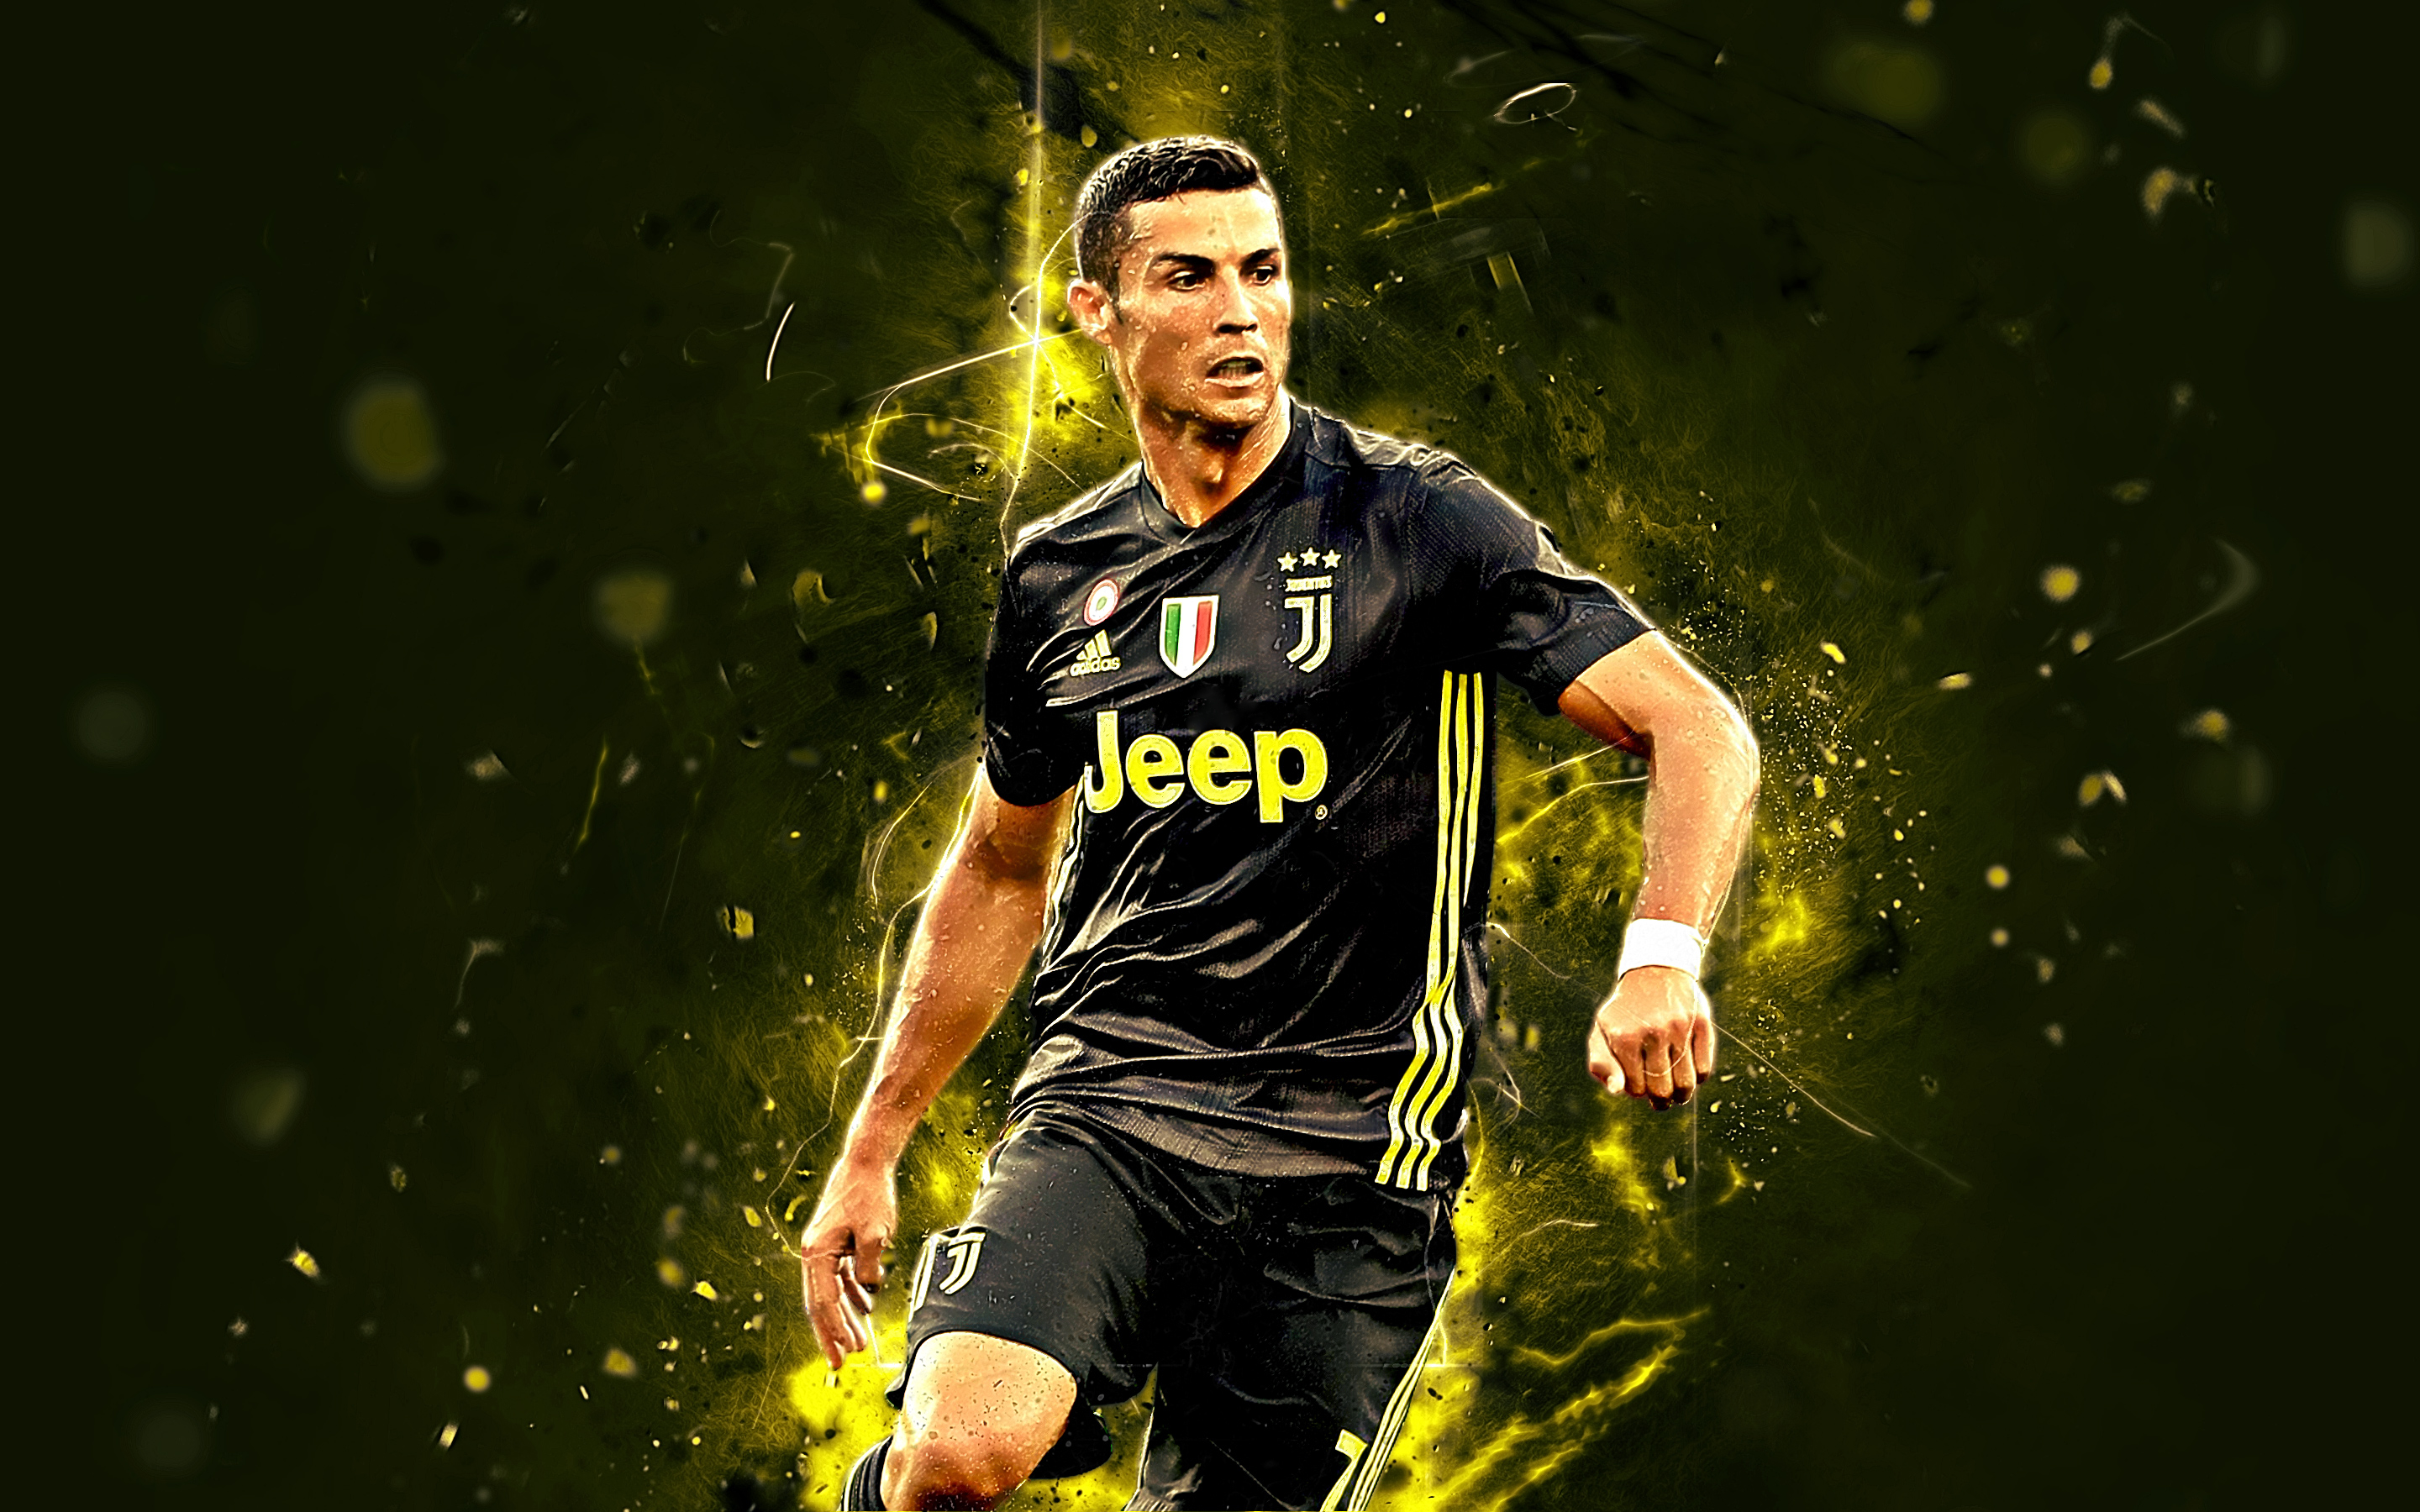 Cristiano Ronaldo 046 Juventus Fc Wlochy Serie A Tapety Na Pulpit